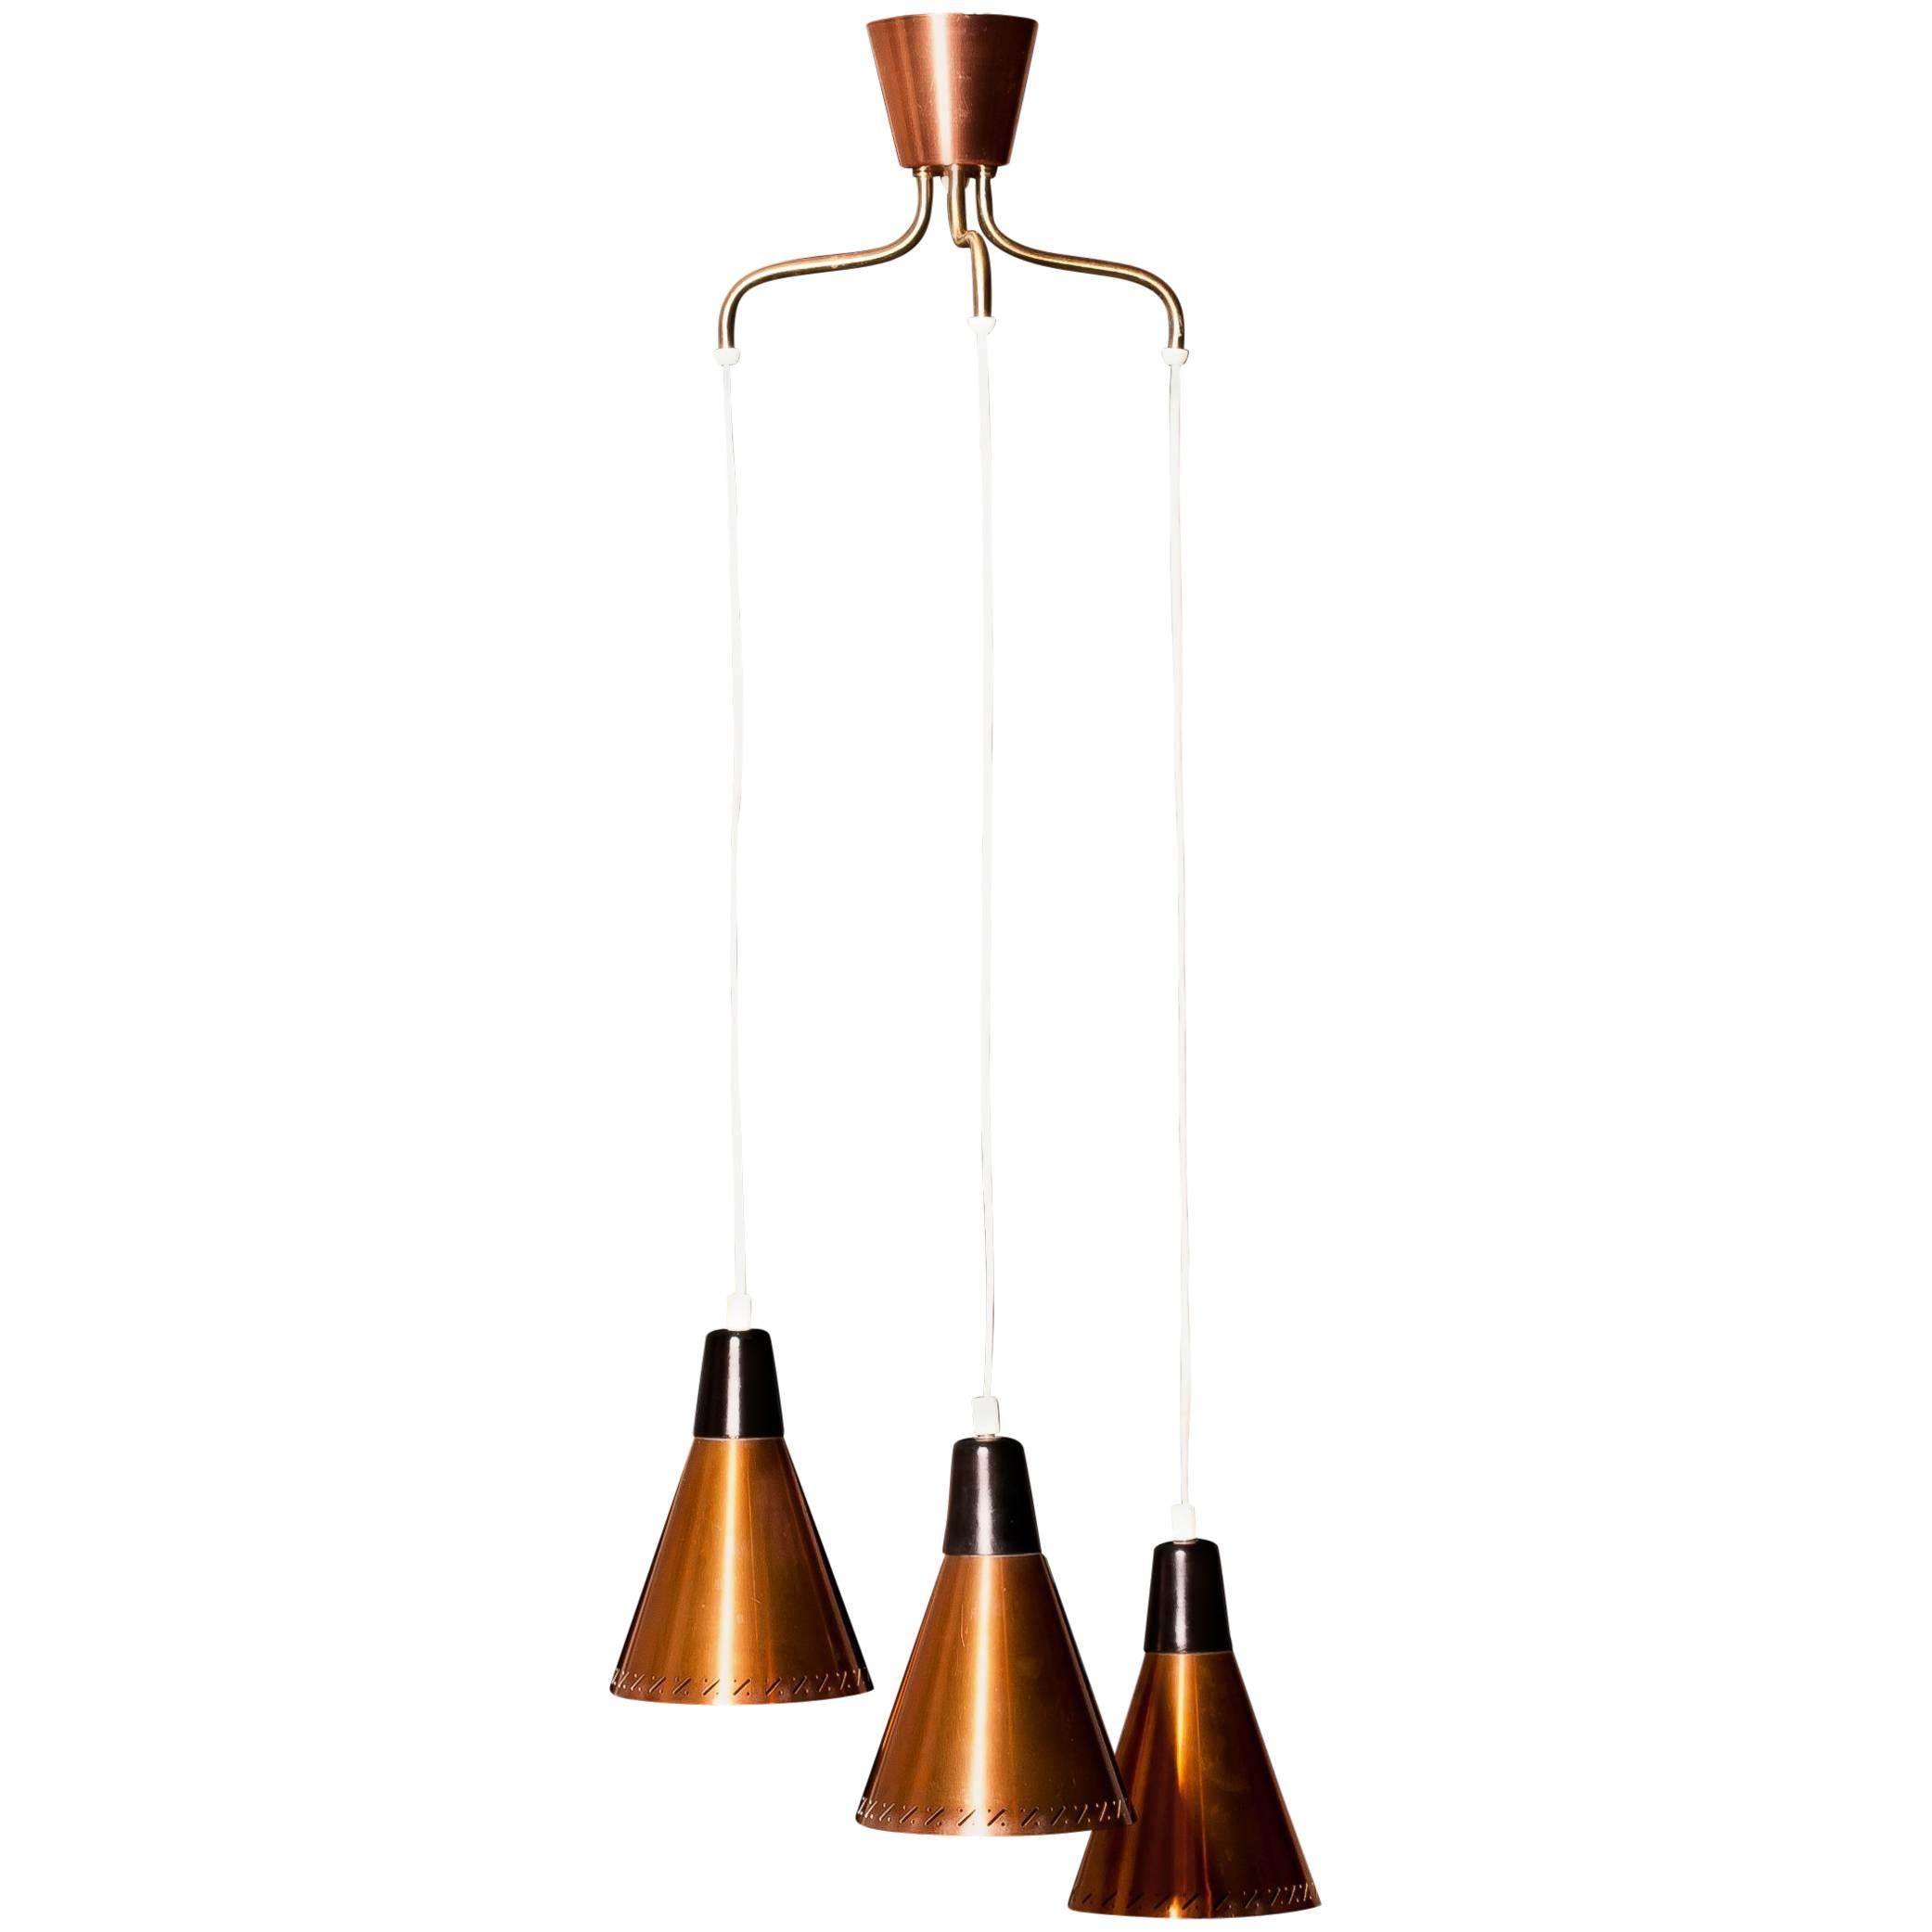 1950s, Copper and Brass Pendant Lamp by Hans-Agne Jakobsson, Sweden